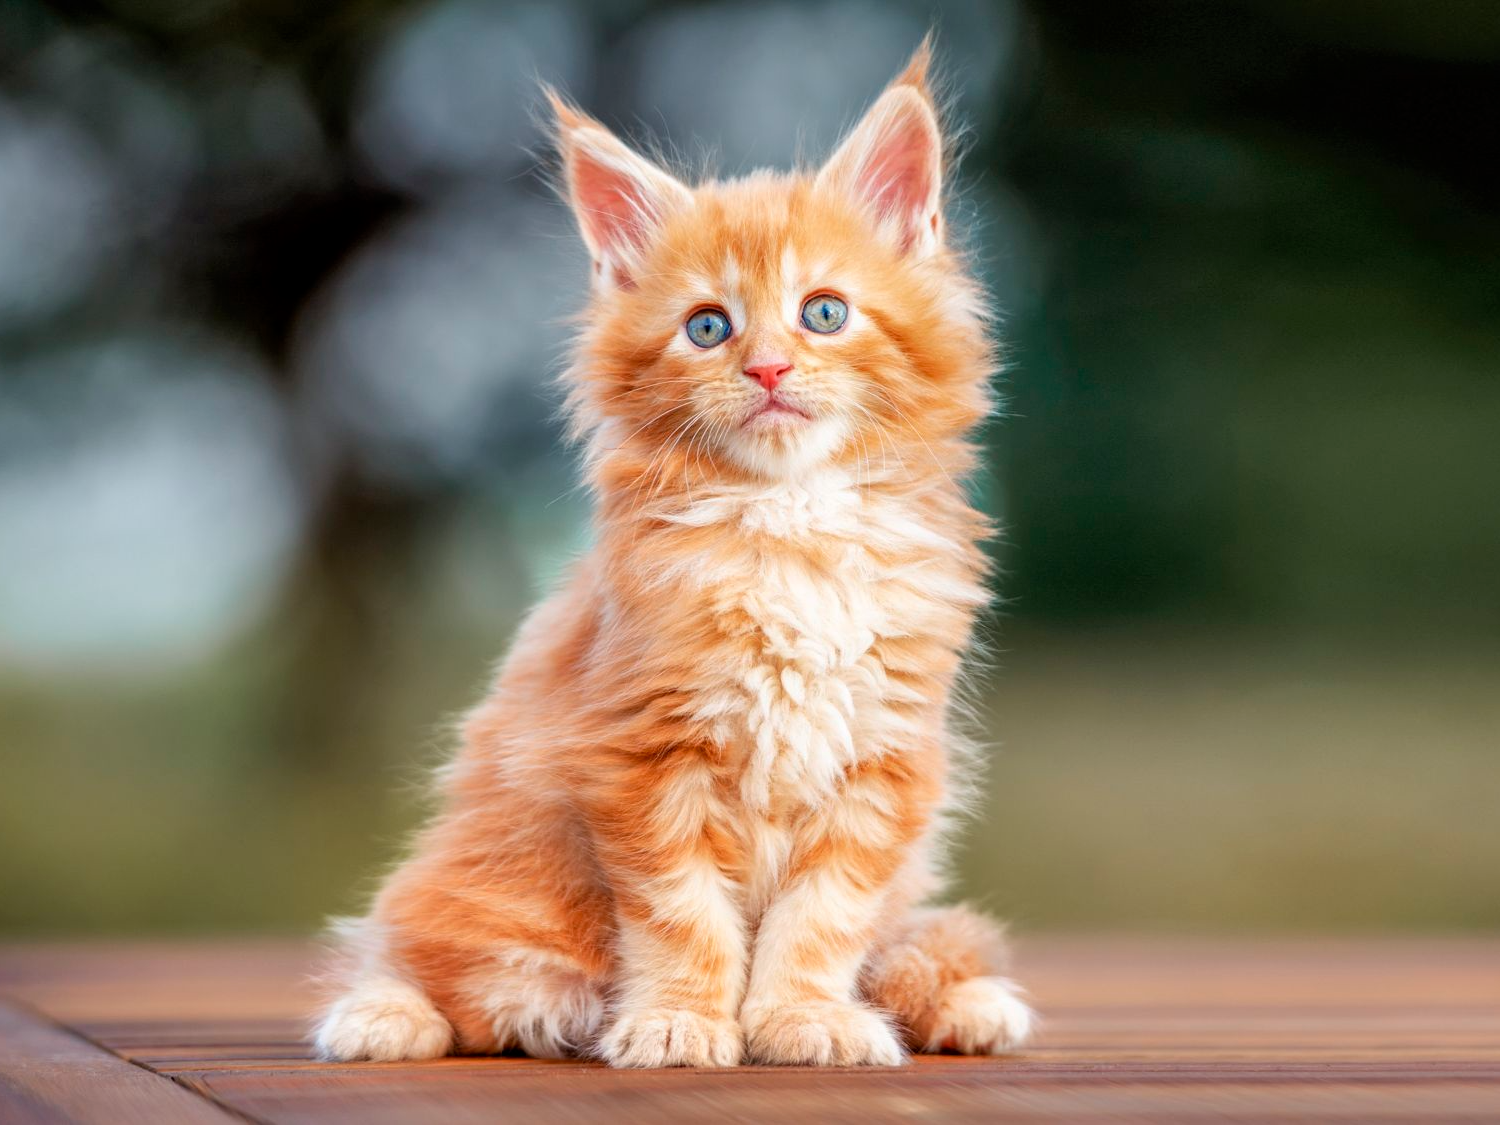 Maine Coon kitten sitting outside on a wooden table